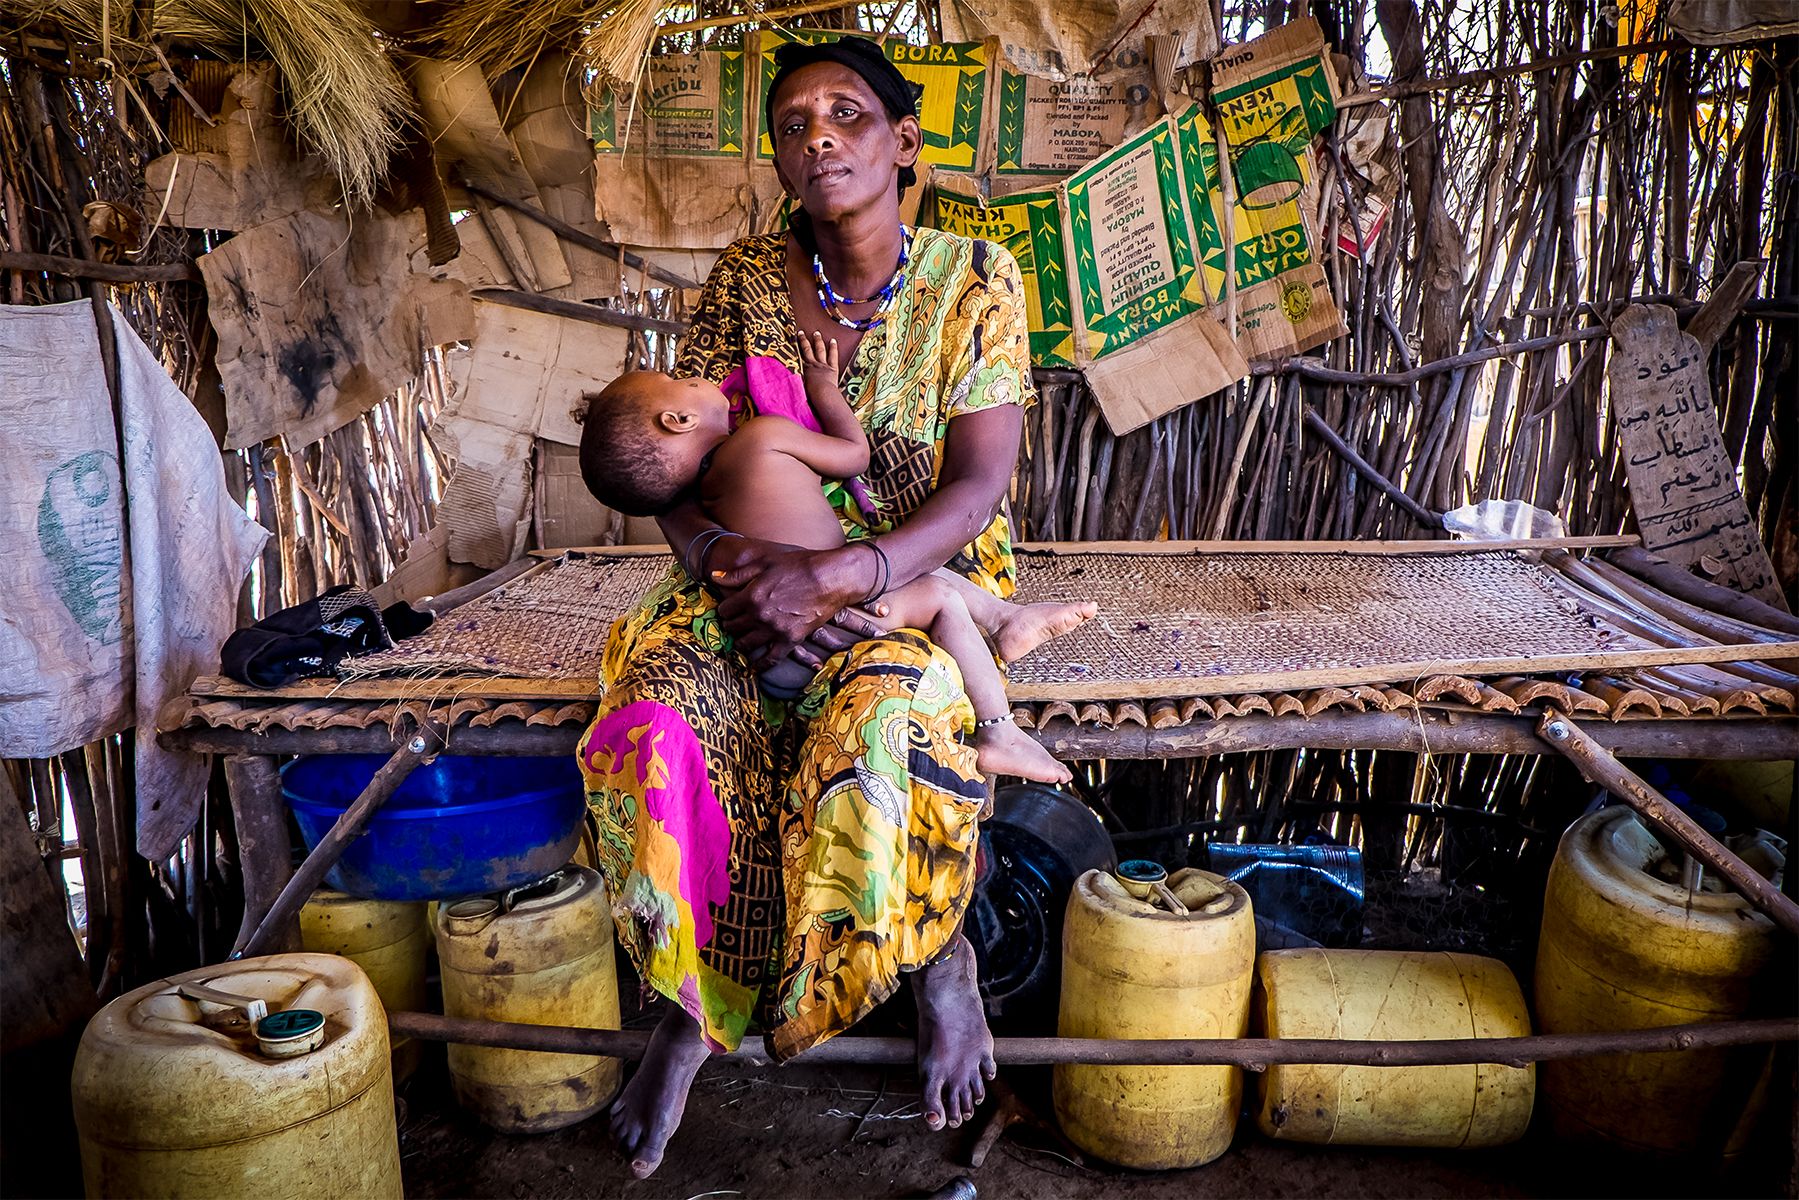 Bisharu al-Hussein, 42, sits with her young son, her tenth child, in their home in Gafarsa, a goat-herding community in Kenya. Bisharu lost her ninth child in pregnancy because she was unable to access appropriate medical care. In Kenya, maternal mortality has only been reduced by one-half of one percent for each of the last twenty years. Kenya’s government is partnering with civil society to provide free maternal health services to mothers to improve their lives and childbirth safety, but many challenges a